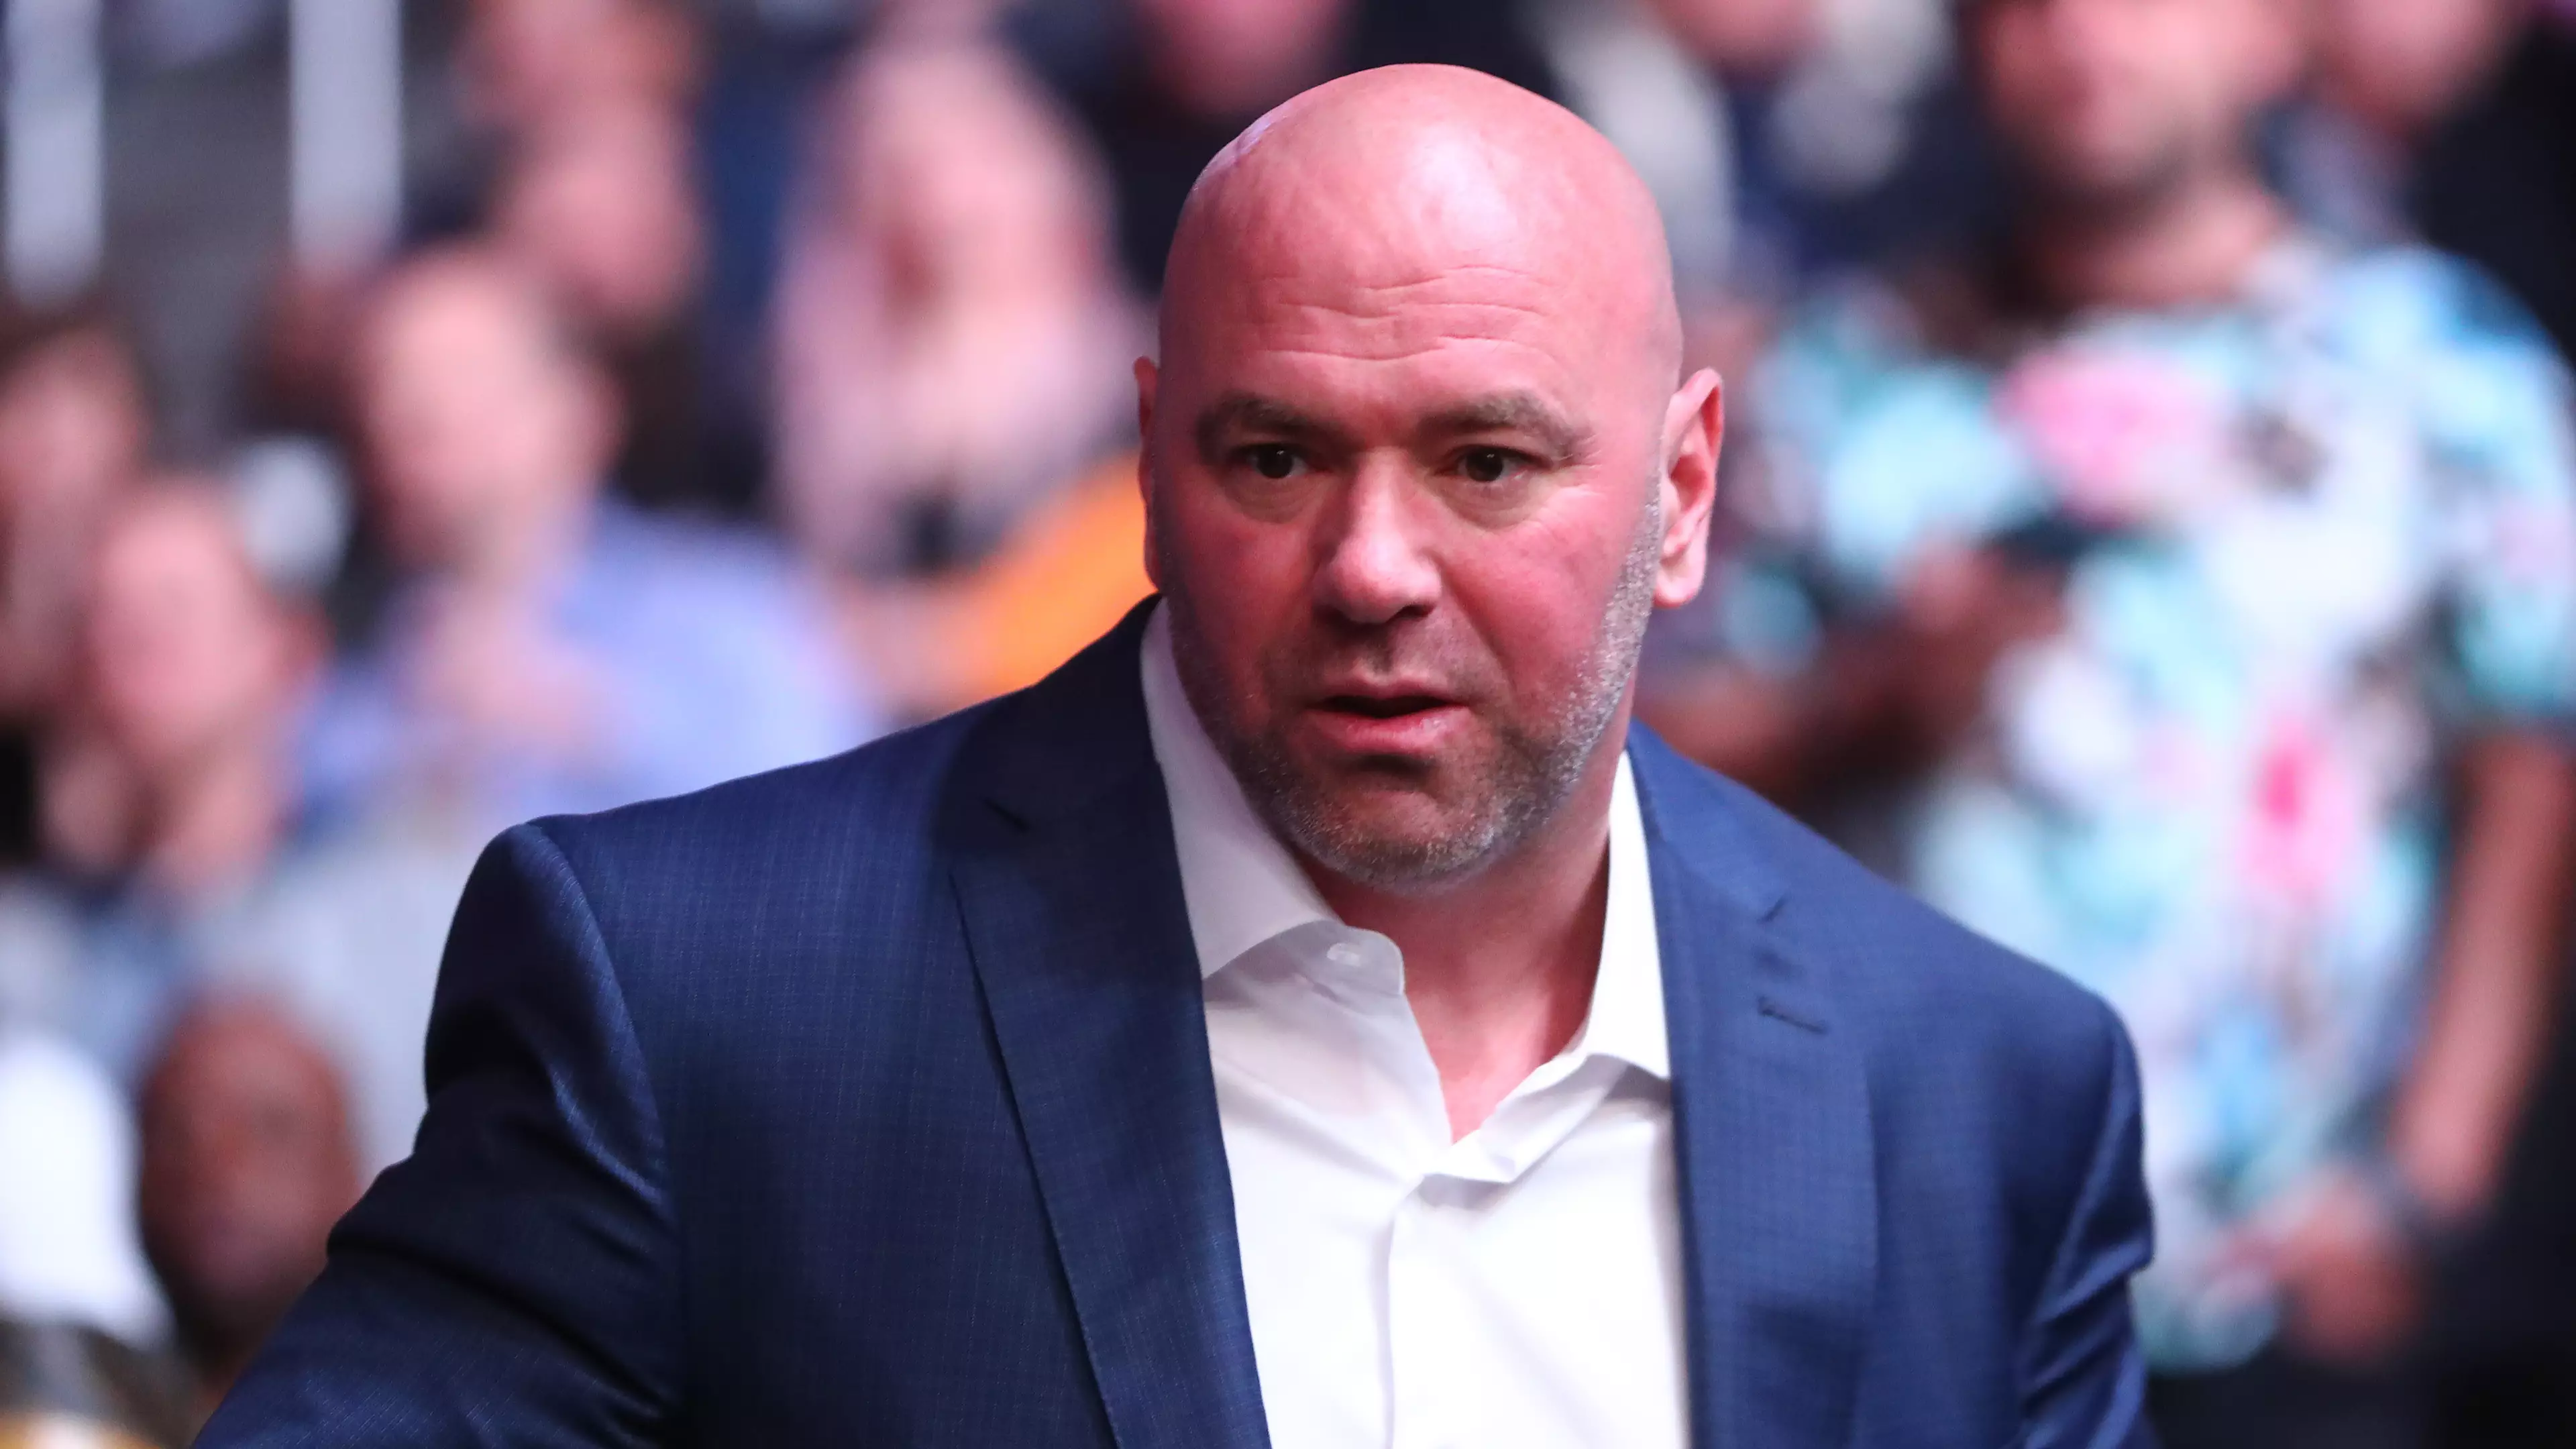 Dana White Says He's Buying A Private Island For UFC Fights